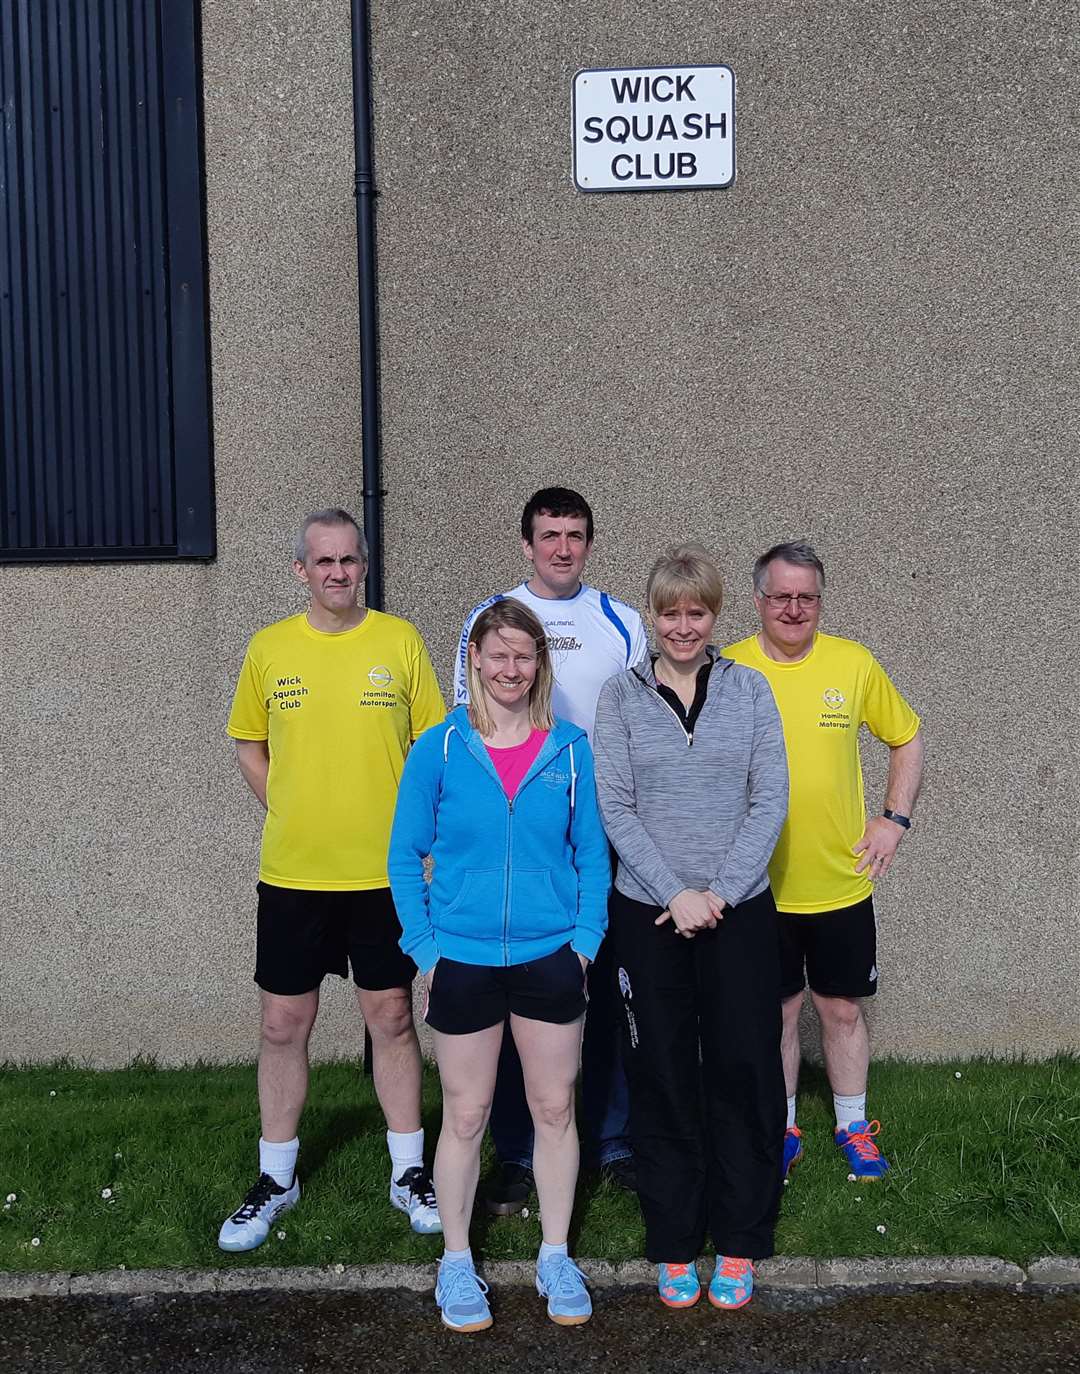 Some of the Caithness contingent outside Wick Squash Club after a successful tournament in Inverness. From left: Donald Durrand, Mhairi Vines, Andrew Bremner, Carole Begg and Willie Jappy. Missing from the picture are Jane Grant and Willie Steven.